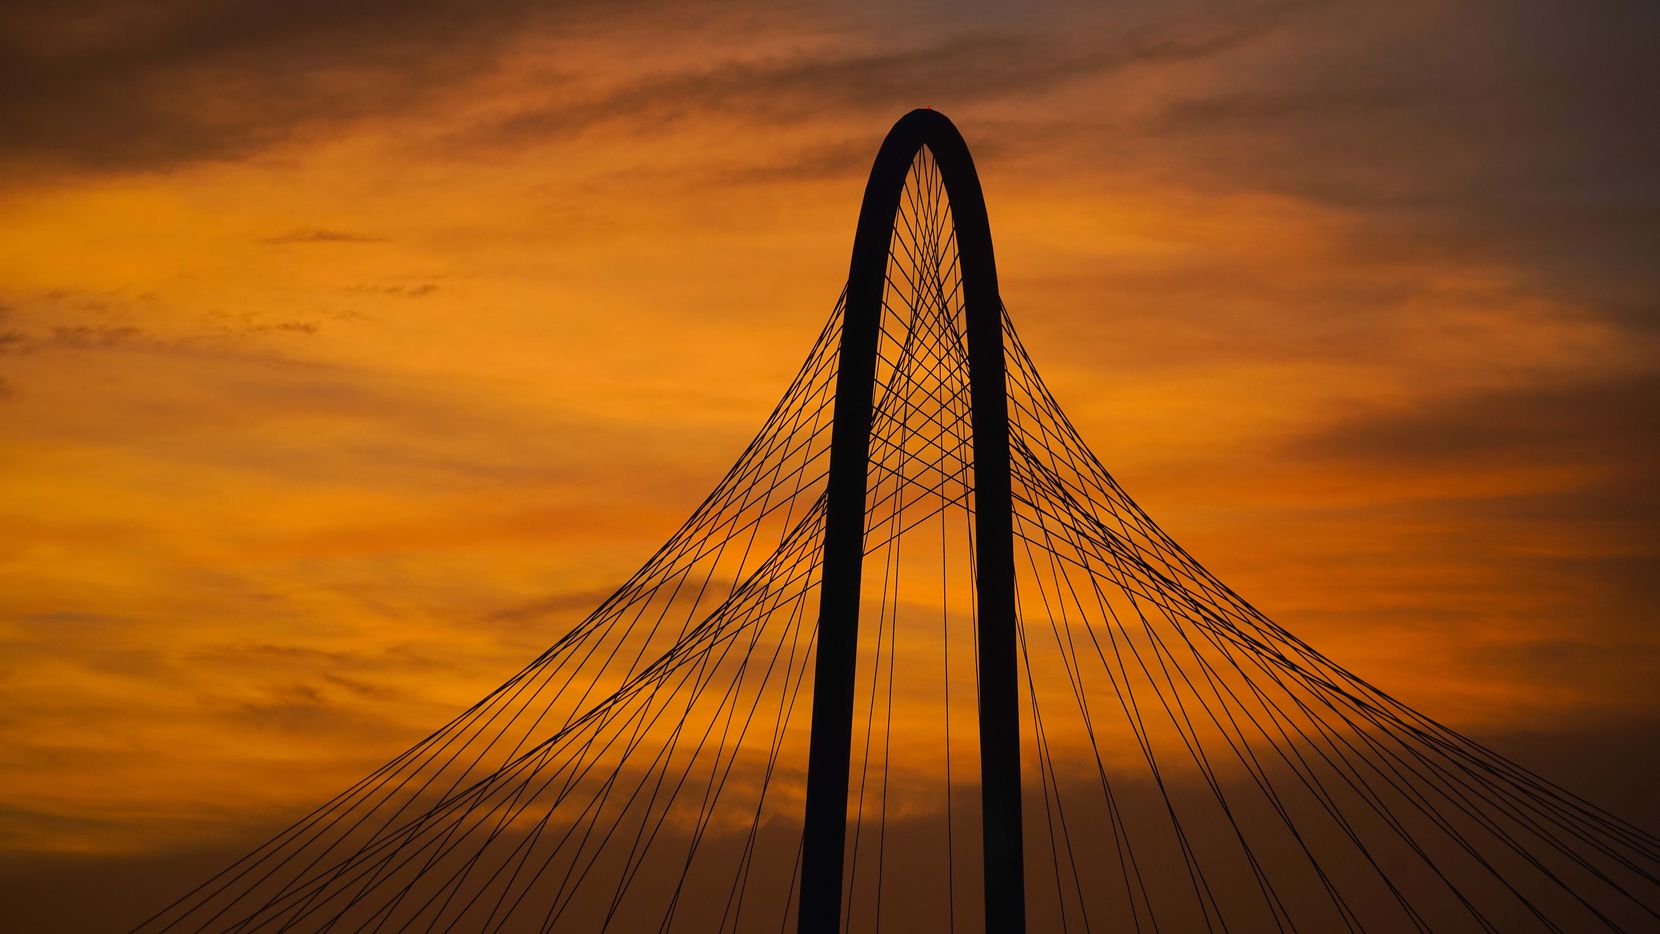 The lingering colors of sunset silhouette the Margaret Hunt Hill Bridge on Tuesday, June 30, 2020, in Dallas.